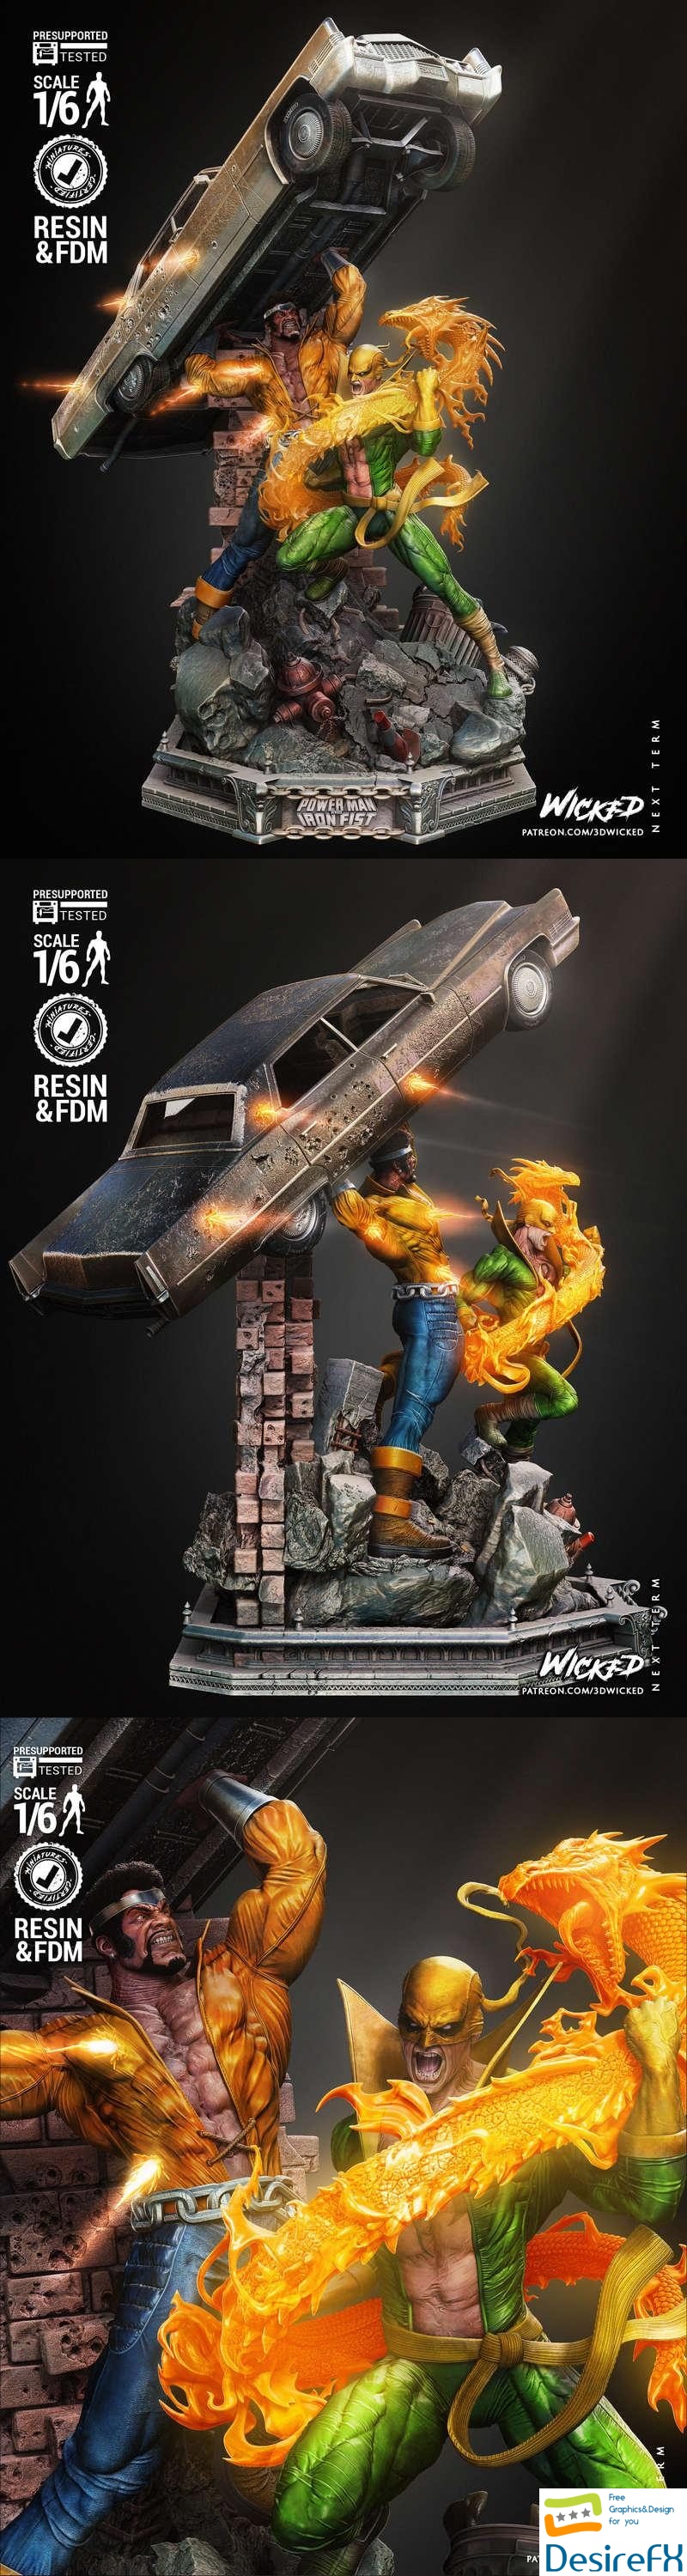 Wicked - Diorama Iron Fist and Luke Cage - 3D Print